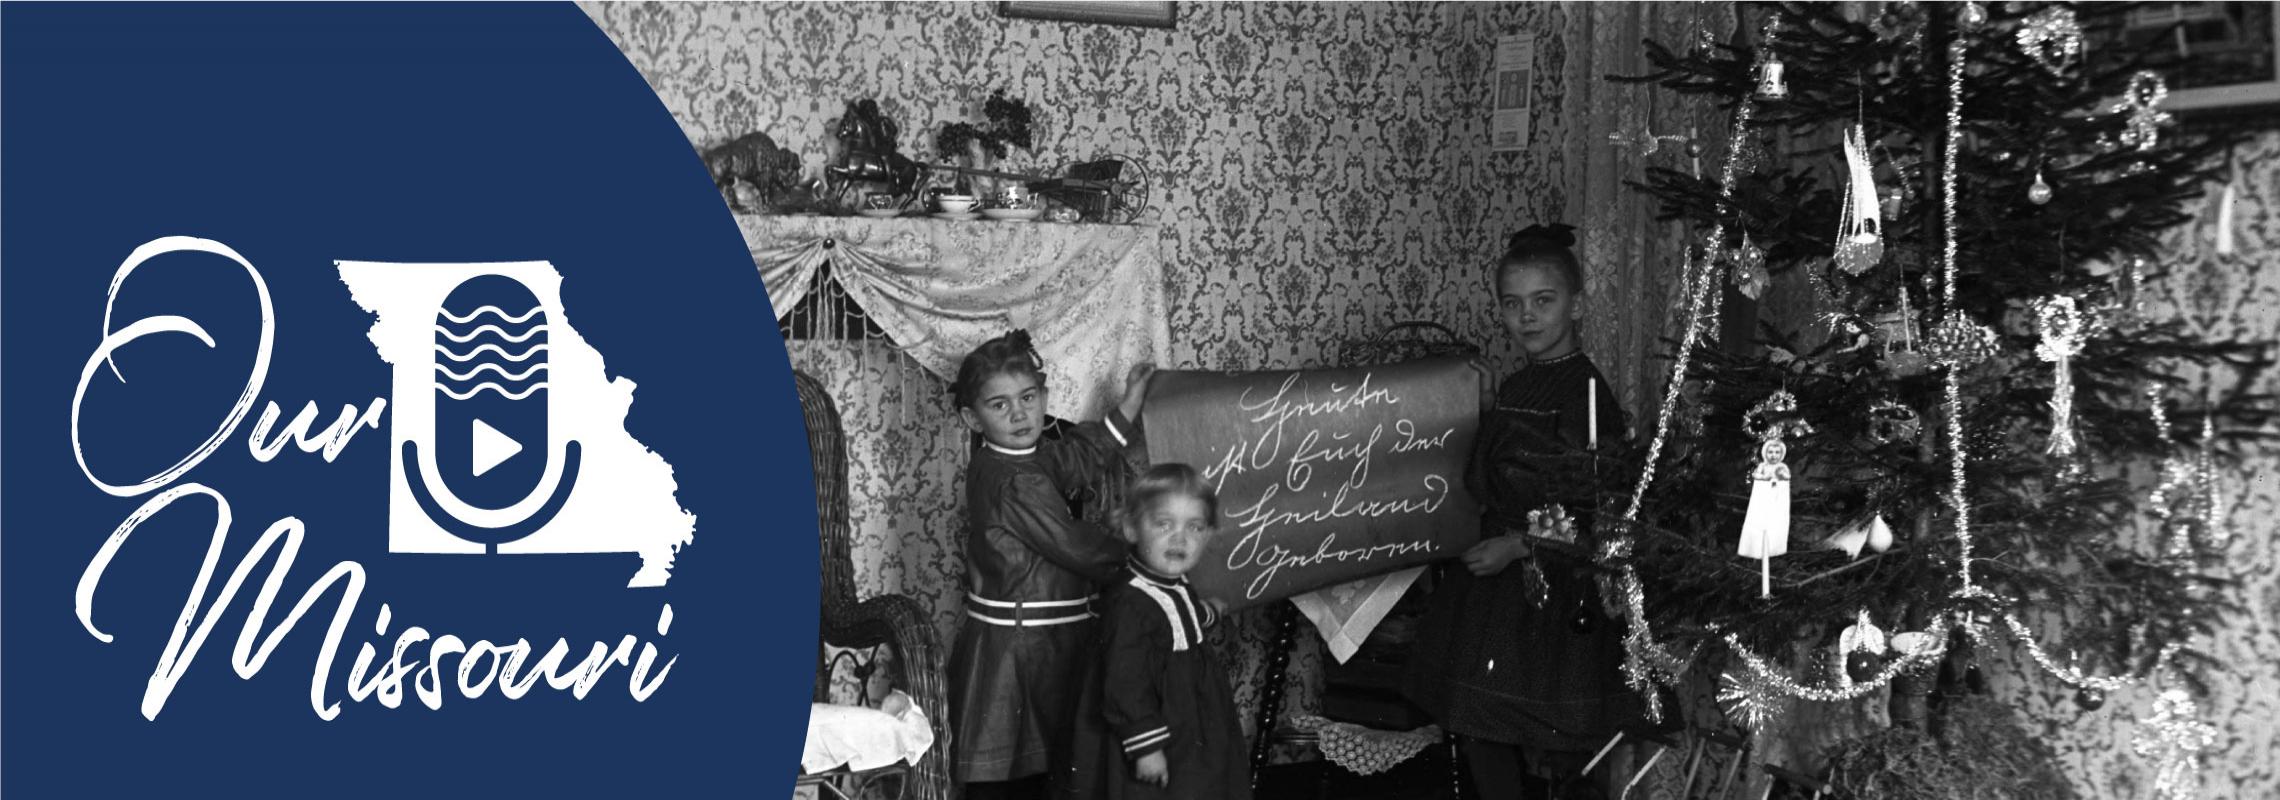 Kemper girls holding Christmas banner translated as "Today the Savior is born to you." [Edward J. Kemper Collection (C4388)]